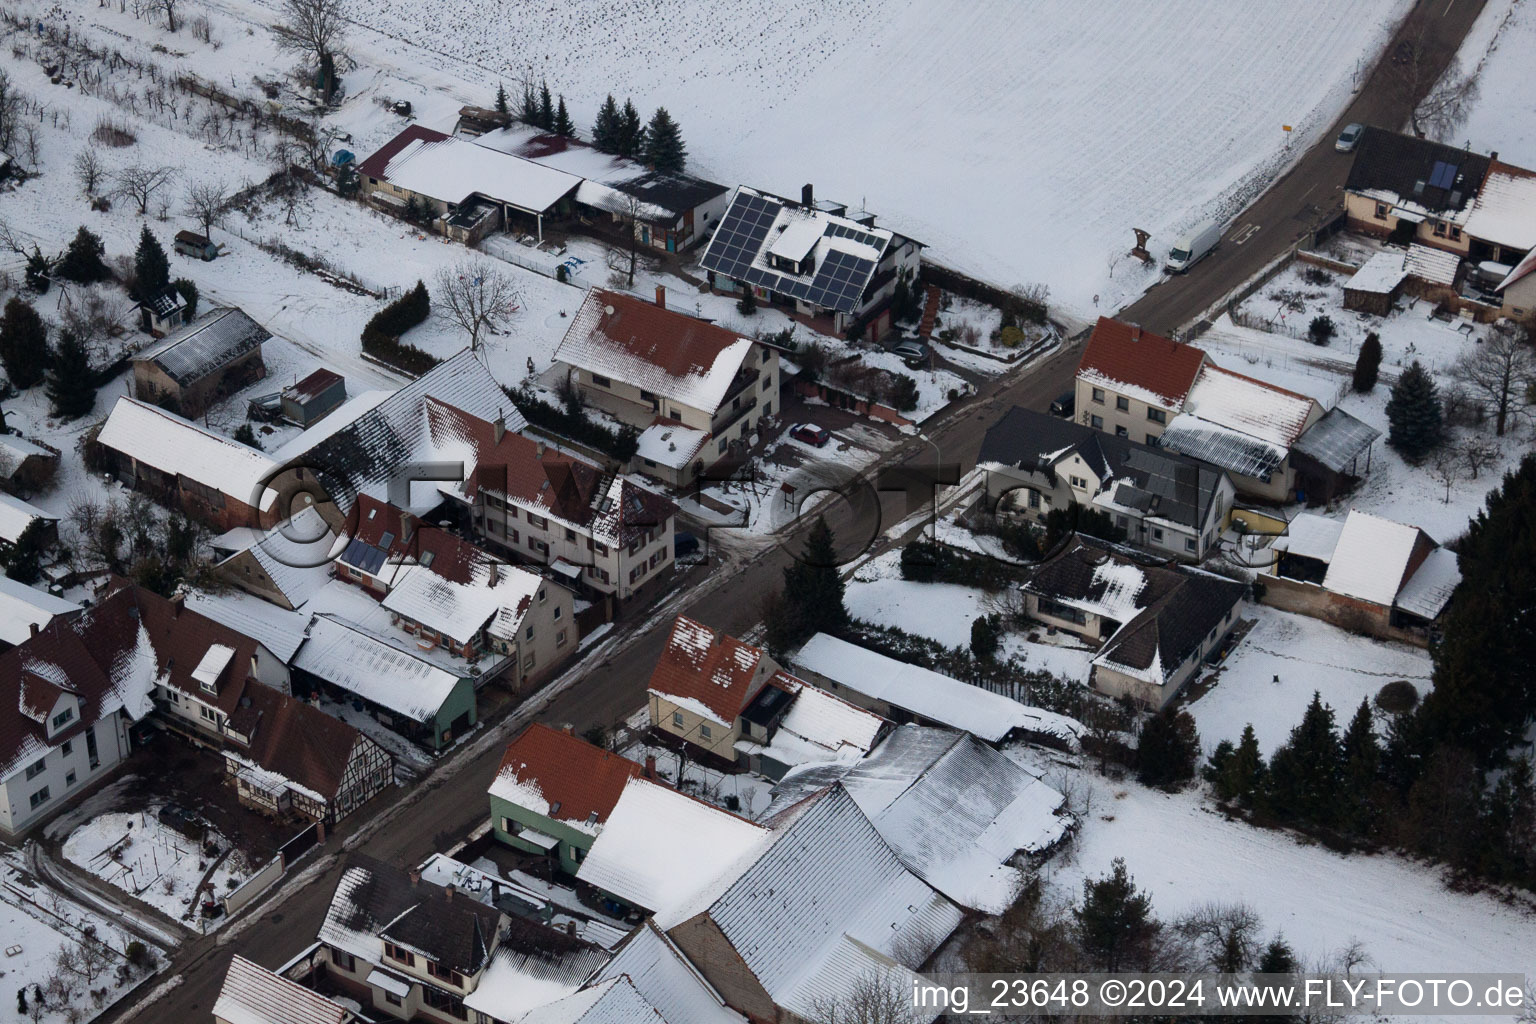 In the snow in winter in the district Kleinsteinfeld in Niederotterbach in the state Rhineland-Palatinate, Germany from the plane